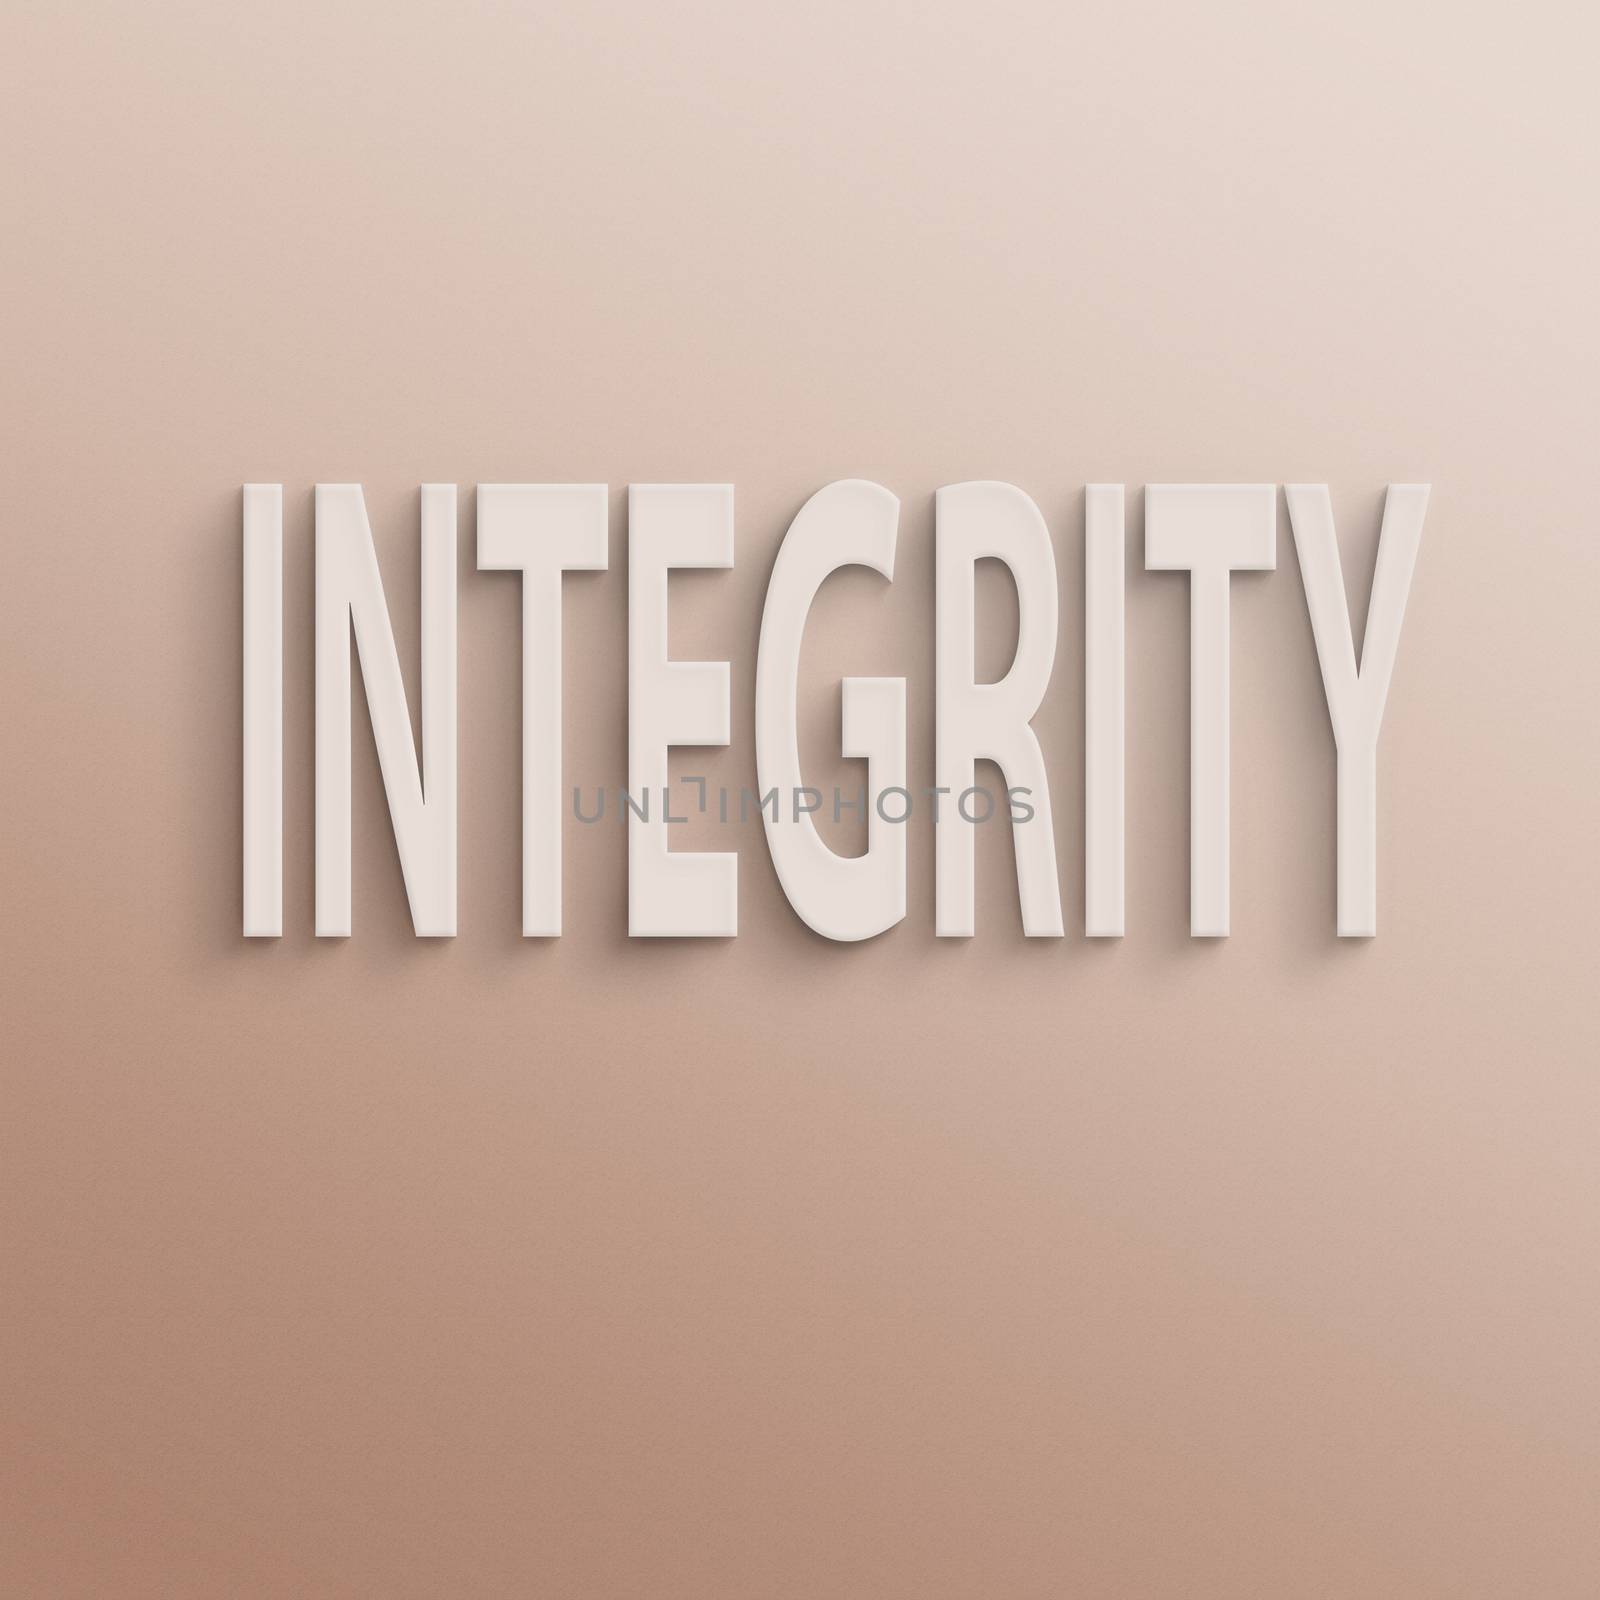 text on the wall or paper, integrity